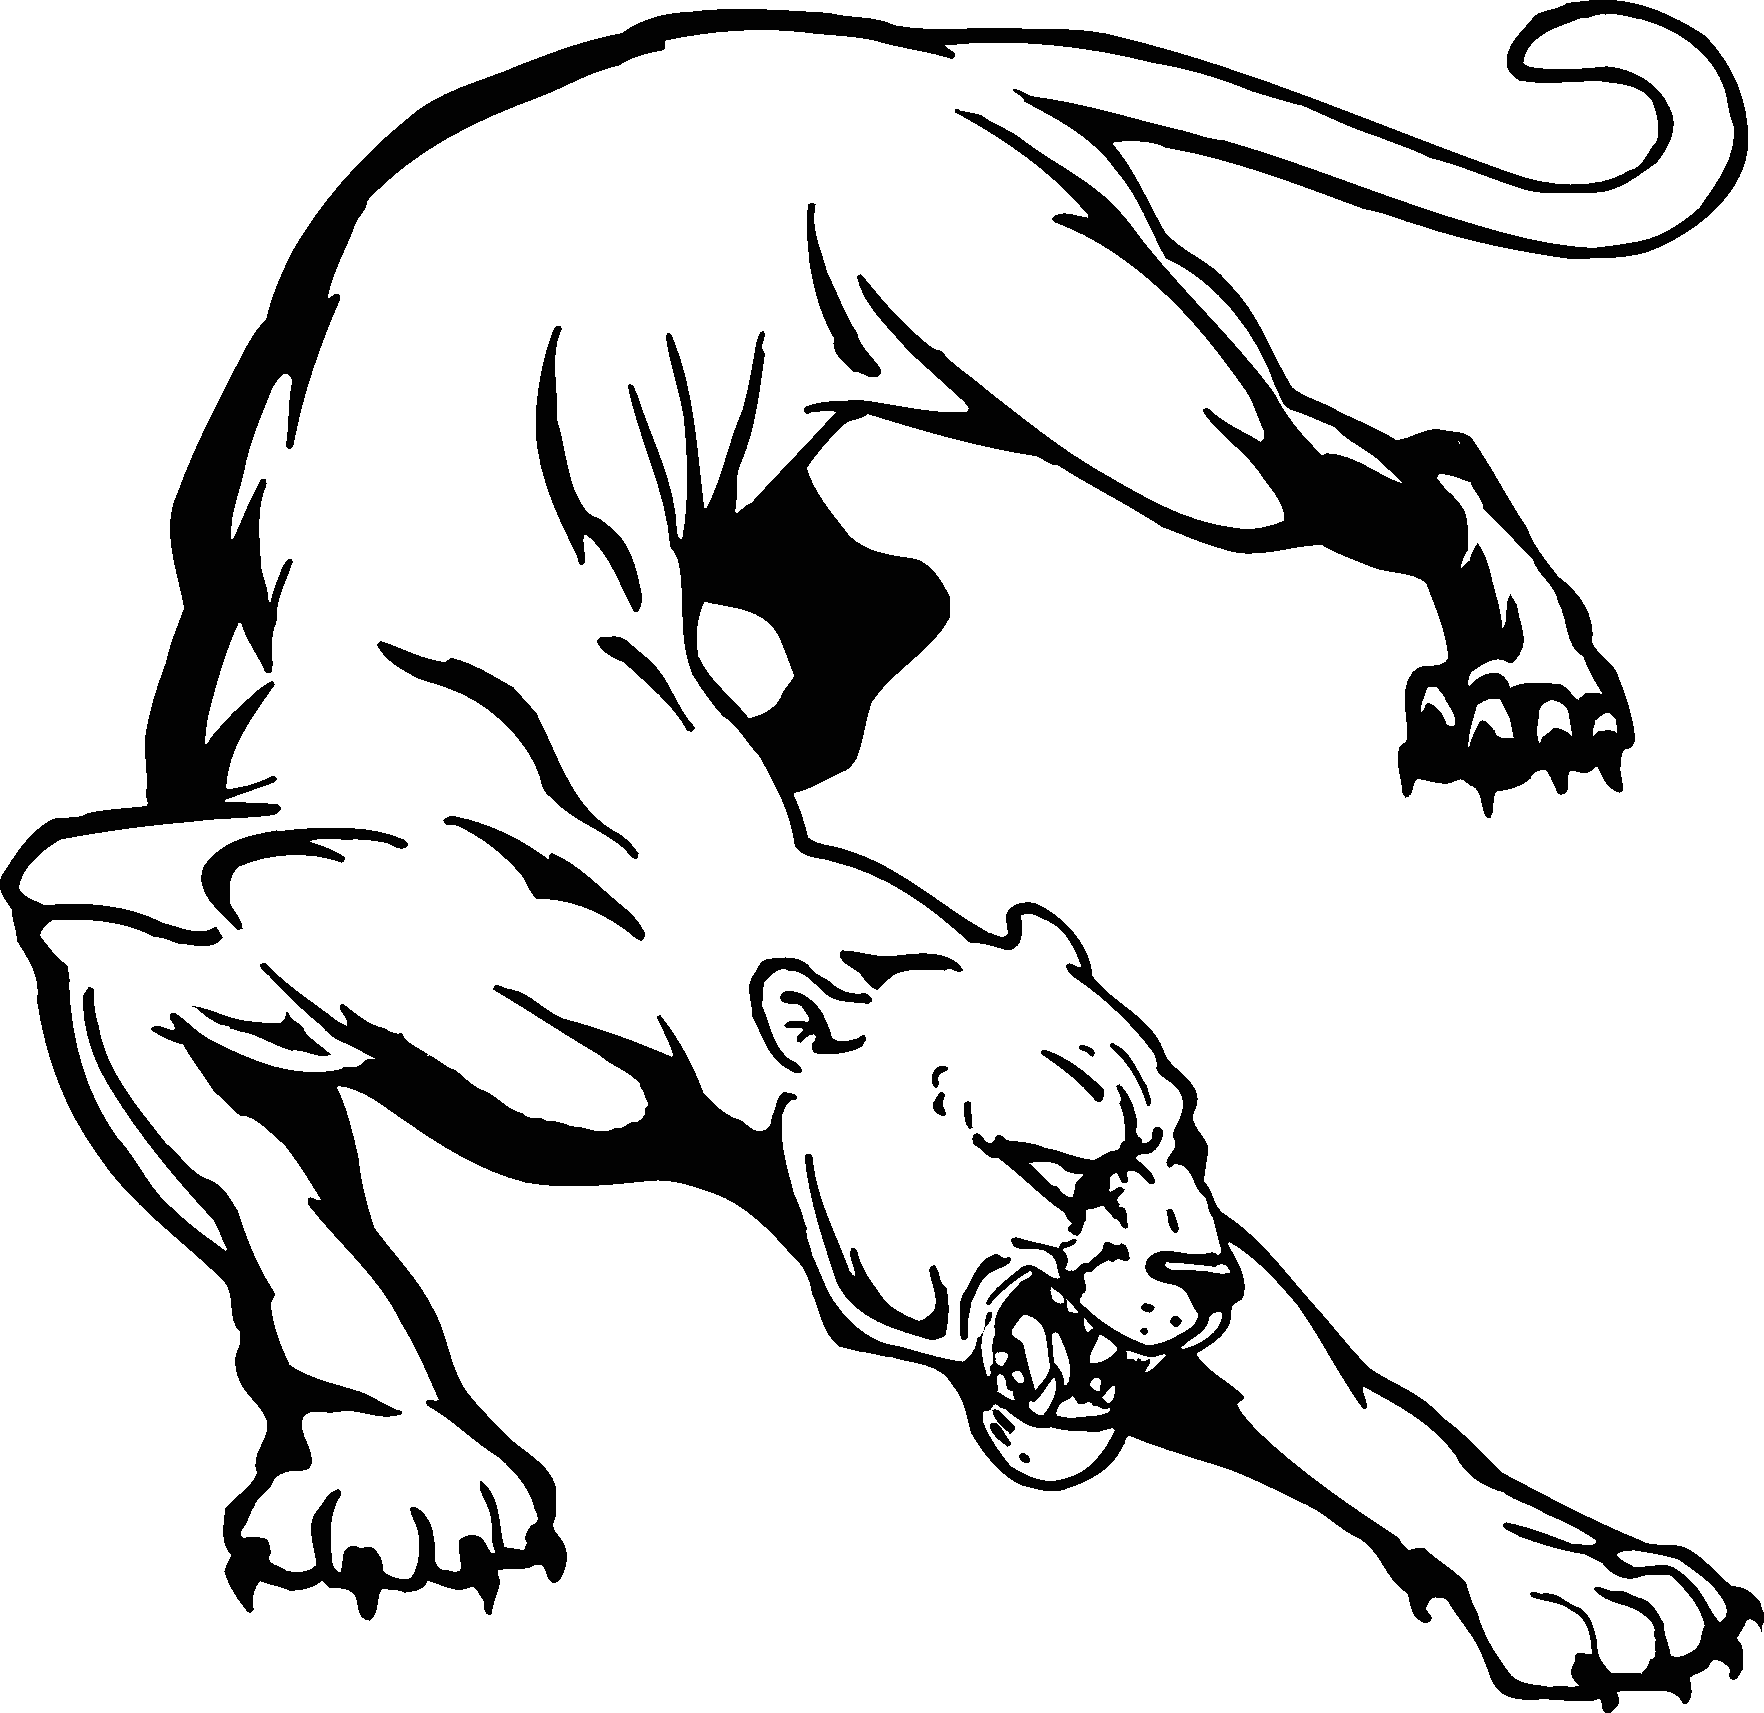 Panther clipart #4, Download drawings